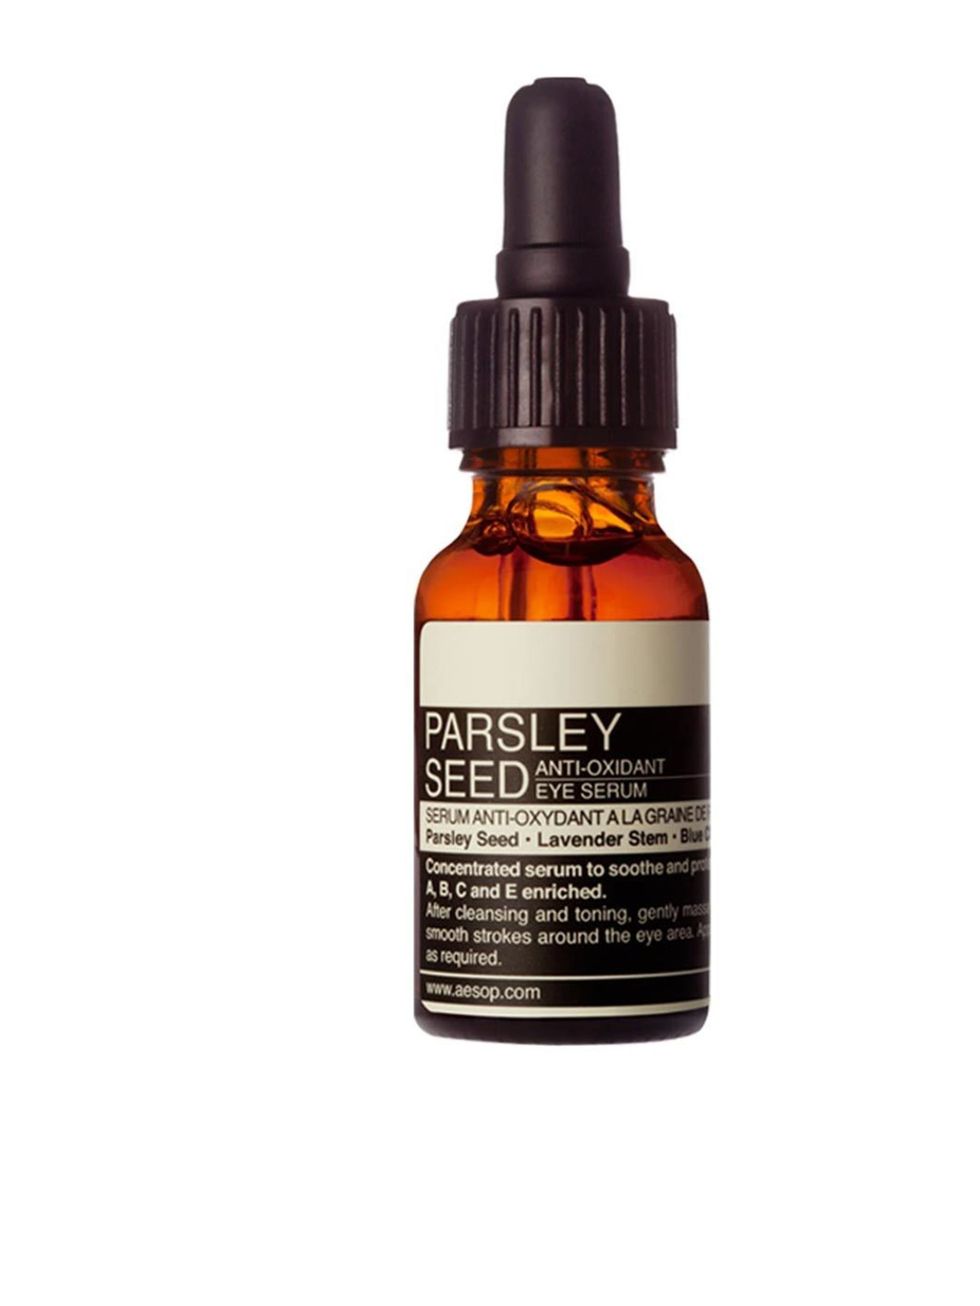 <p>Signs of stress showing on your face? Tackle dark circles and puffyness with<a href="http://www.aesop.com/uk/skin-care-1/parsley-seed-anti-oxidant-eye-serum.html"> Aesops Parsley Seed Anti-oxidant Eye Serum, </a>£55 is packed with vitamin C and E, Lav